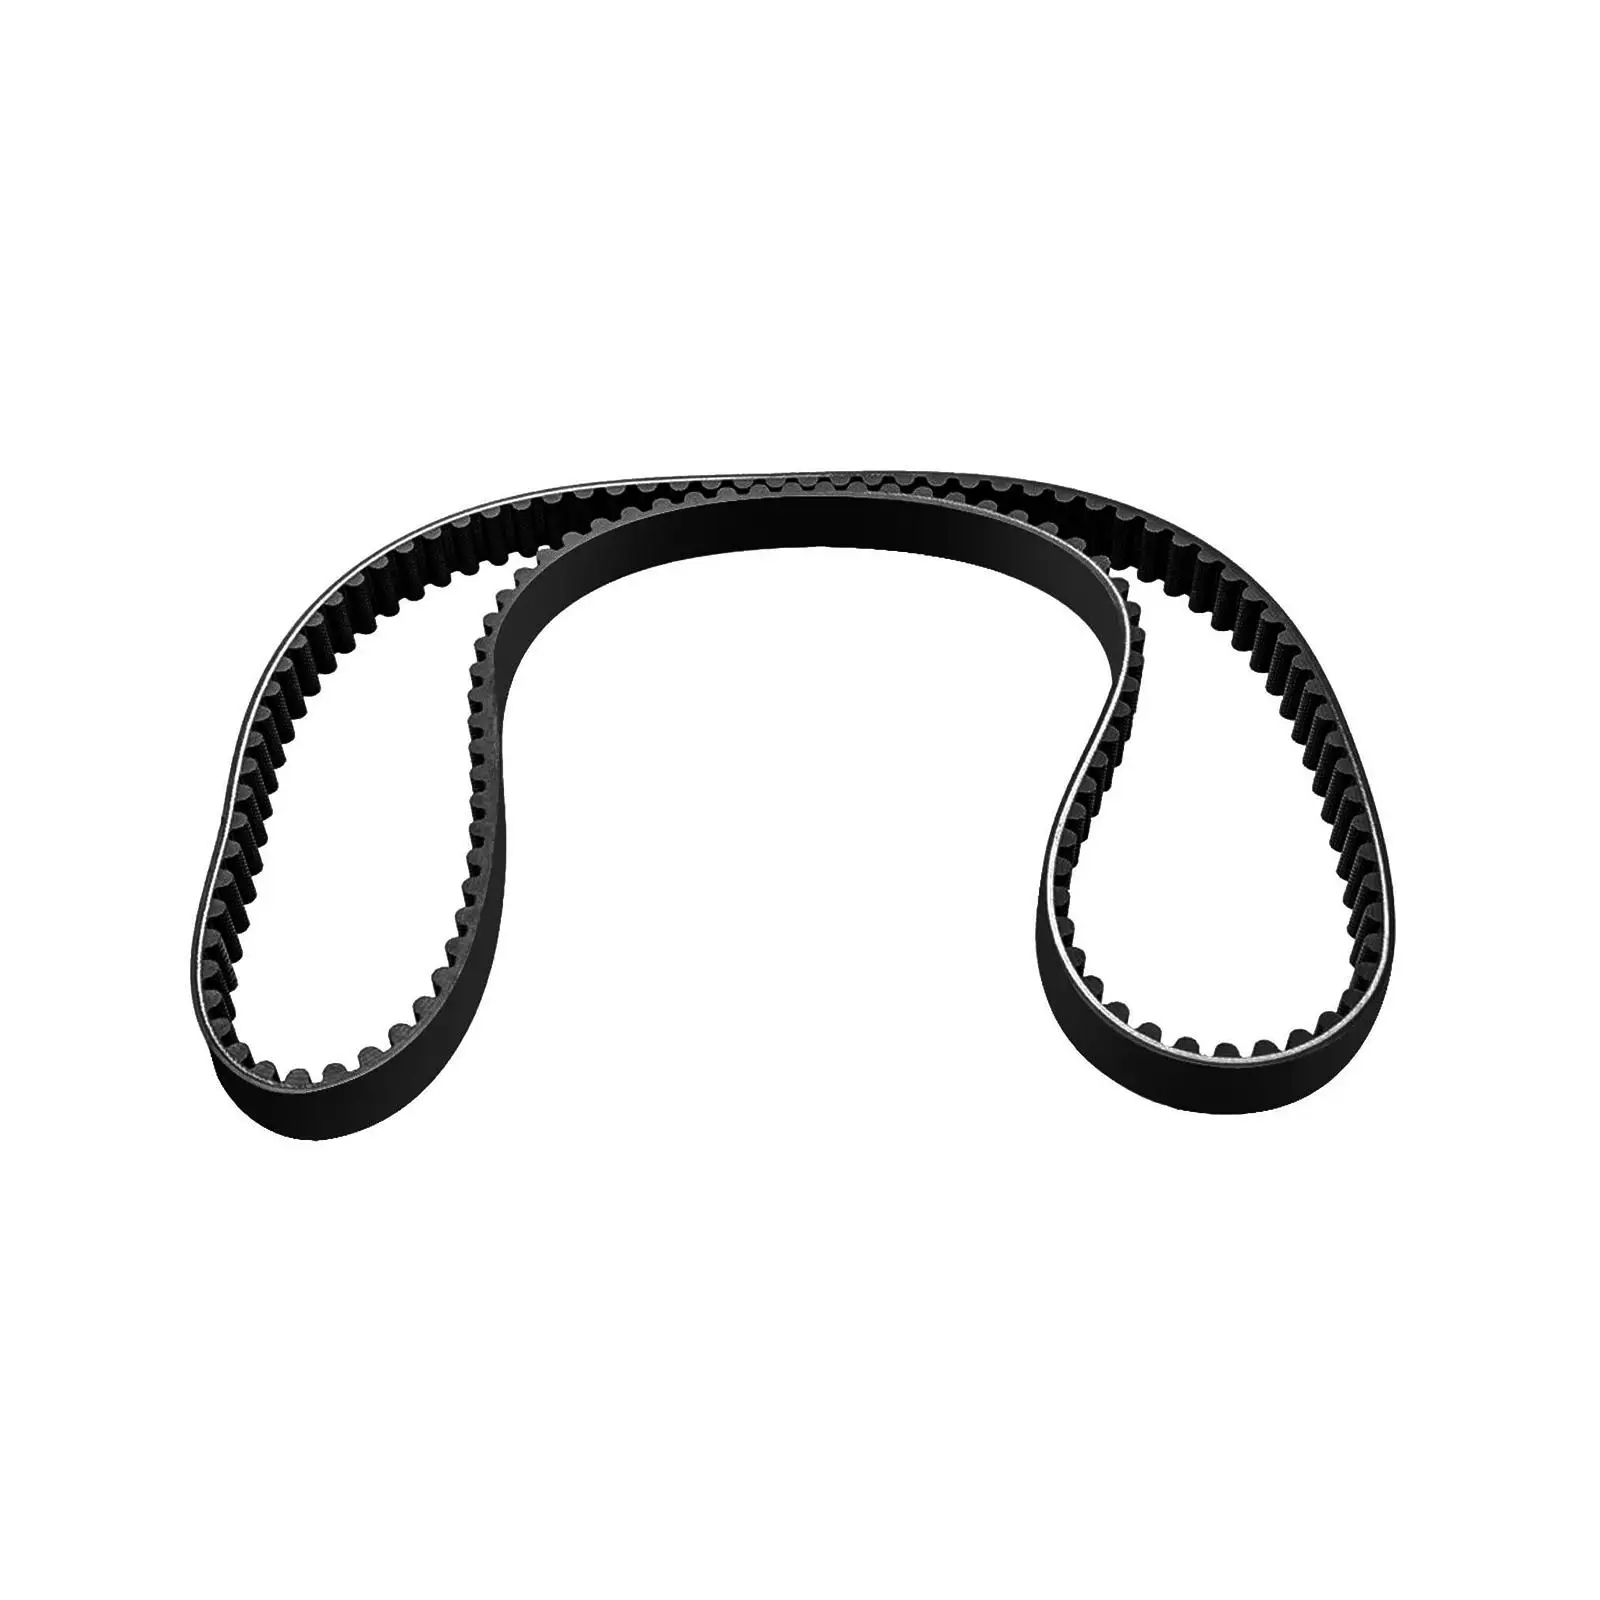 Rear Drive Belt 40001-85 Parabolic Tooth Profile Part for Harley-davidson